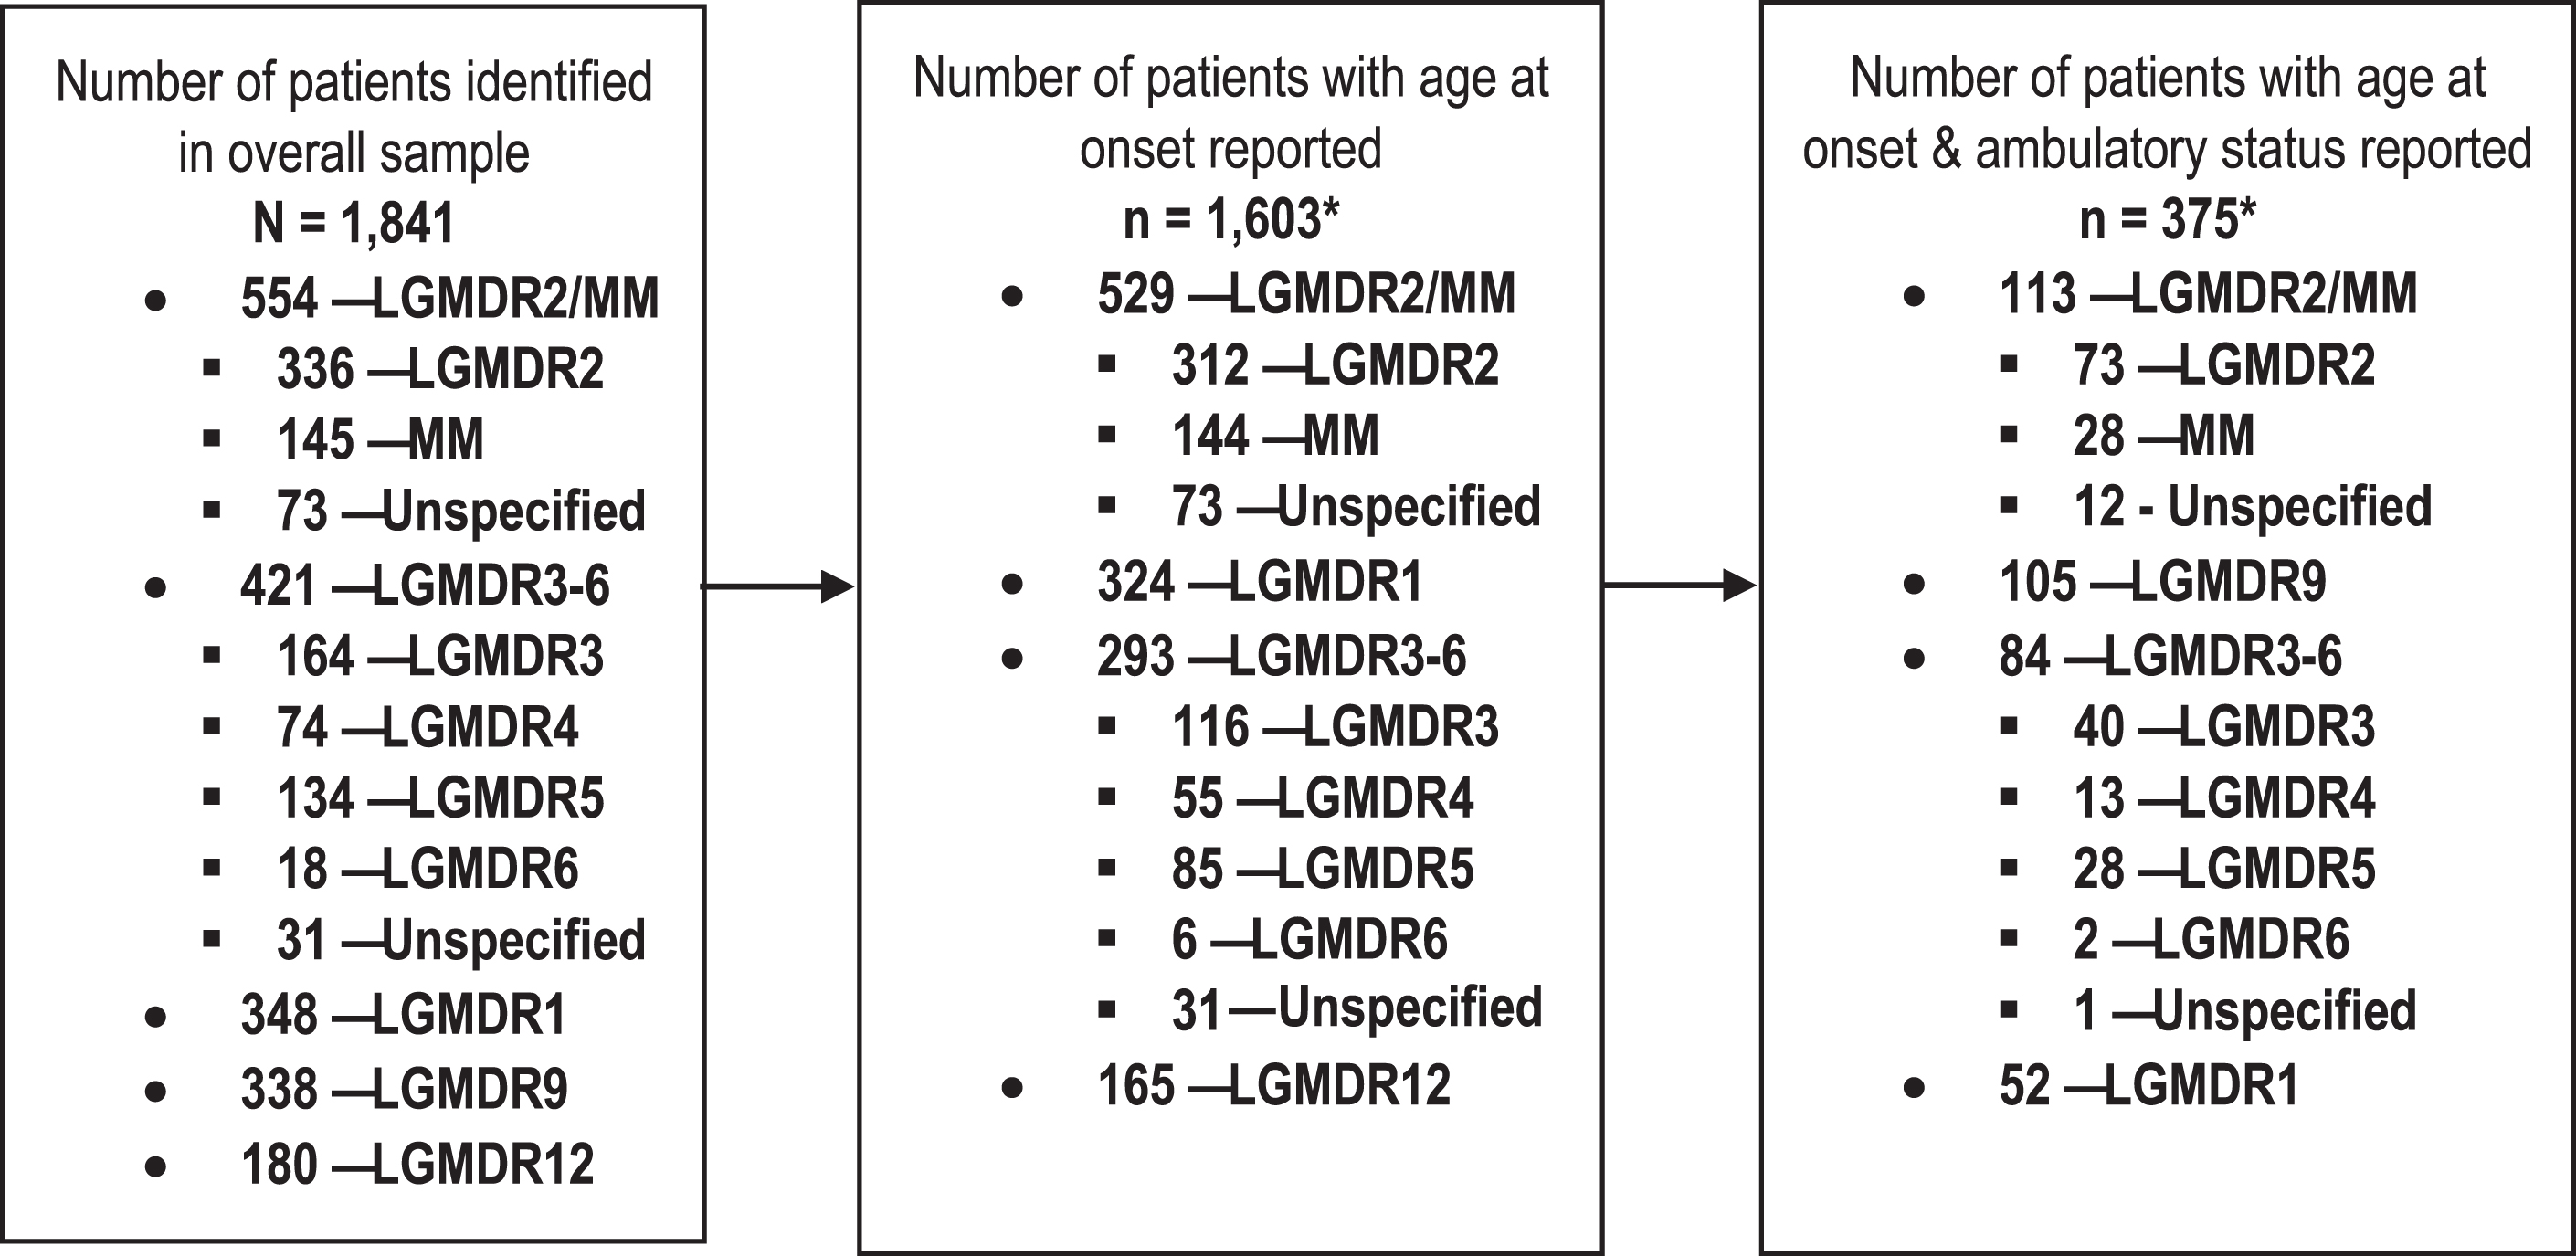 Summary of data availability across LGMDR subtypes. *Includes patients whose age at onset was reported descriptively rather than numerically, with sufficient information to be categorized as having either adult-, late childhood-, or early childhood-onset disease (e.g. onset in “first decade”). Abbreviations: LGMDR, autosomal recessive limb girdle muscular dystrophy; MM, Miyoshi myopathy.